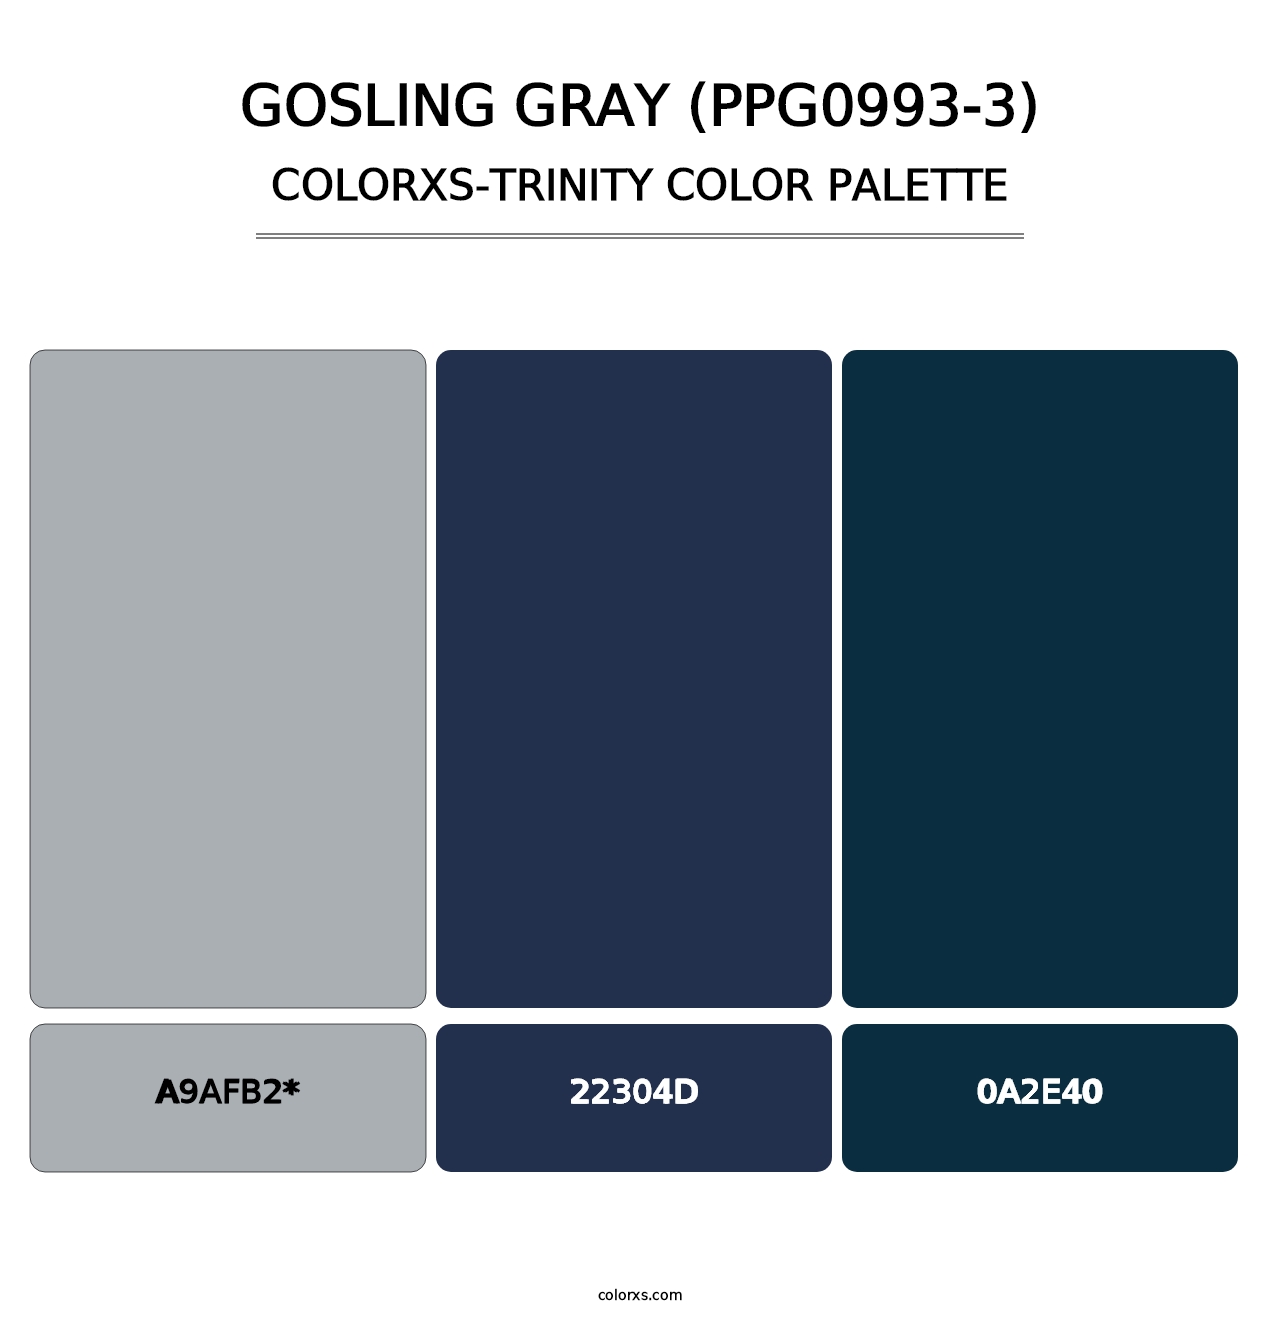 Gosling Gray (PPG0993-3) - Colorxs Trinity Palette